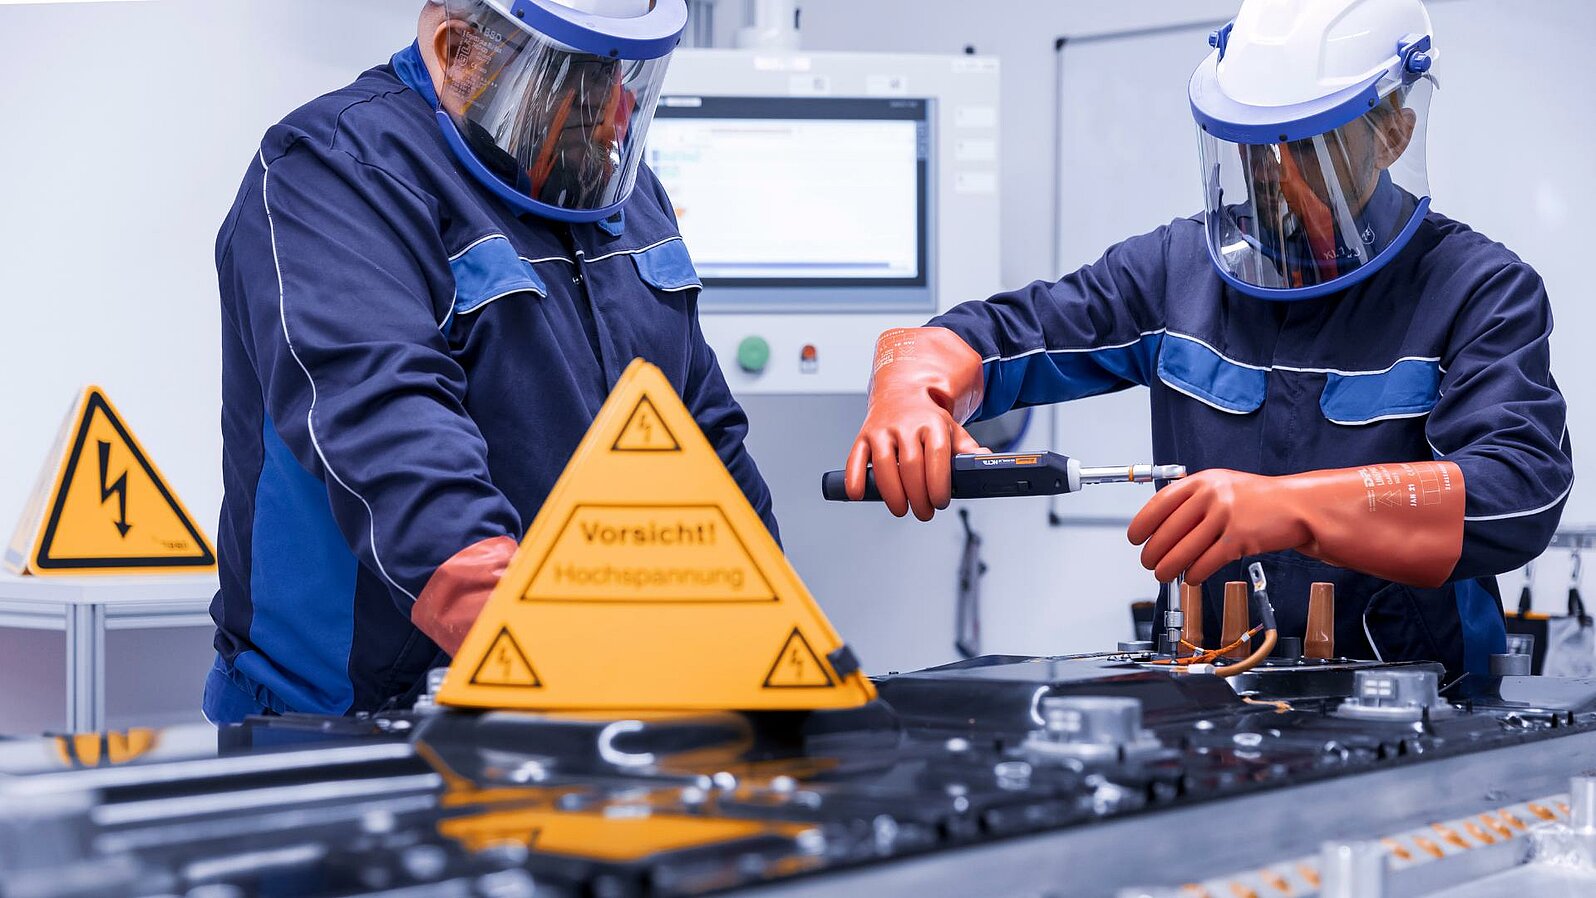 Two Leadec employees in protective clothing repairing a defective battery, in front of them a warning sign for working under high voltage.